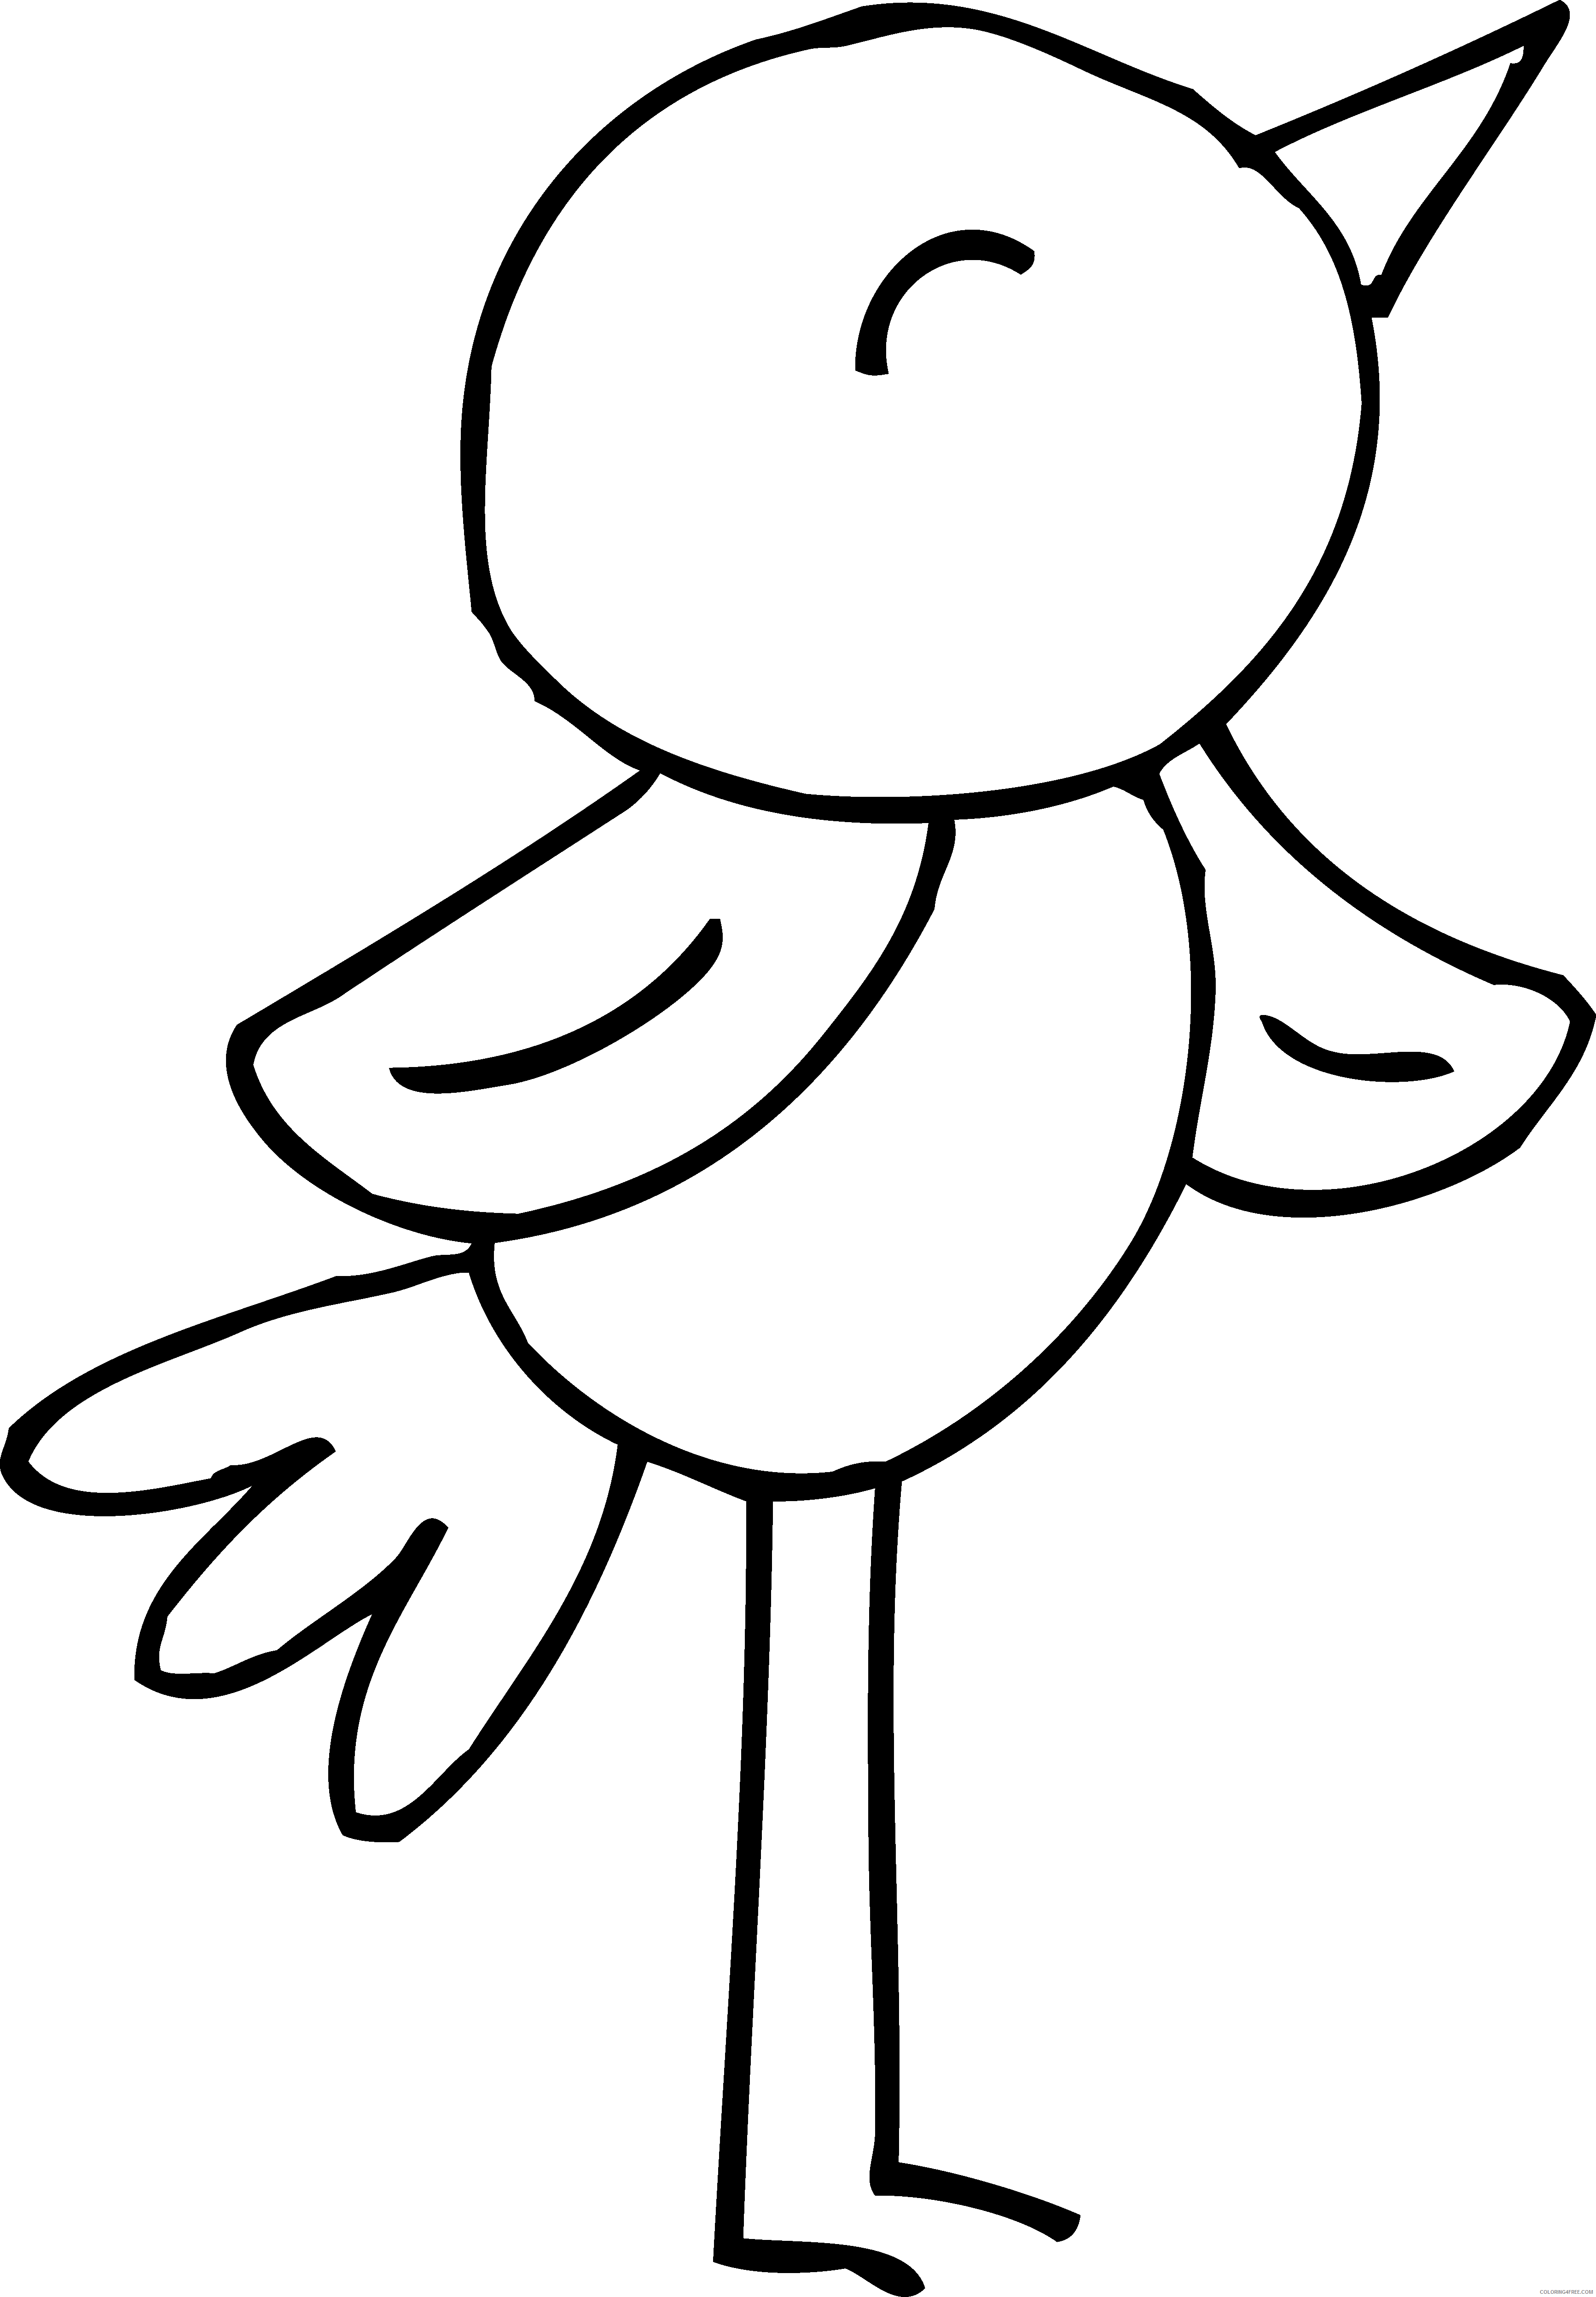 Black and White Bird Coloring Pages bird Printable Coloring4free